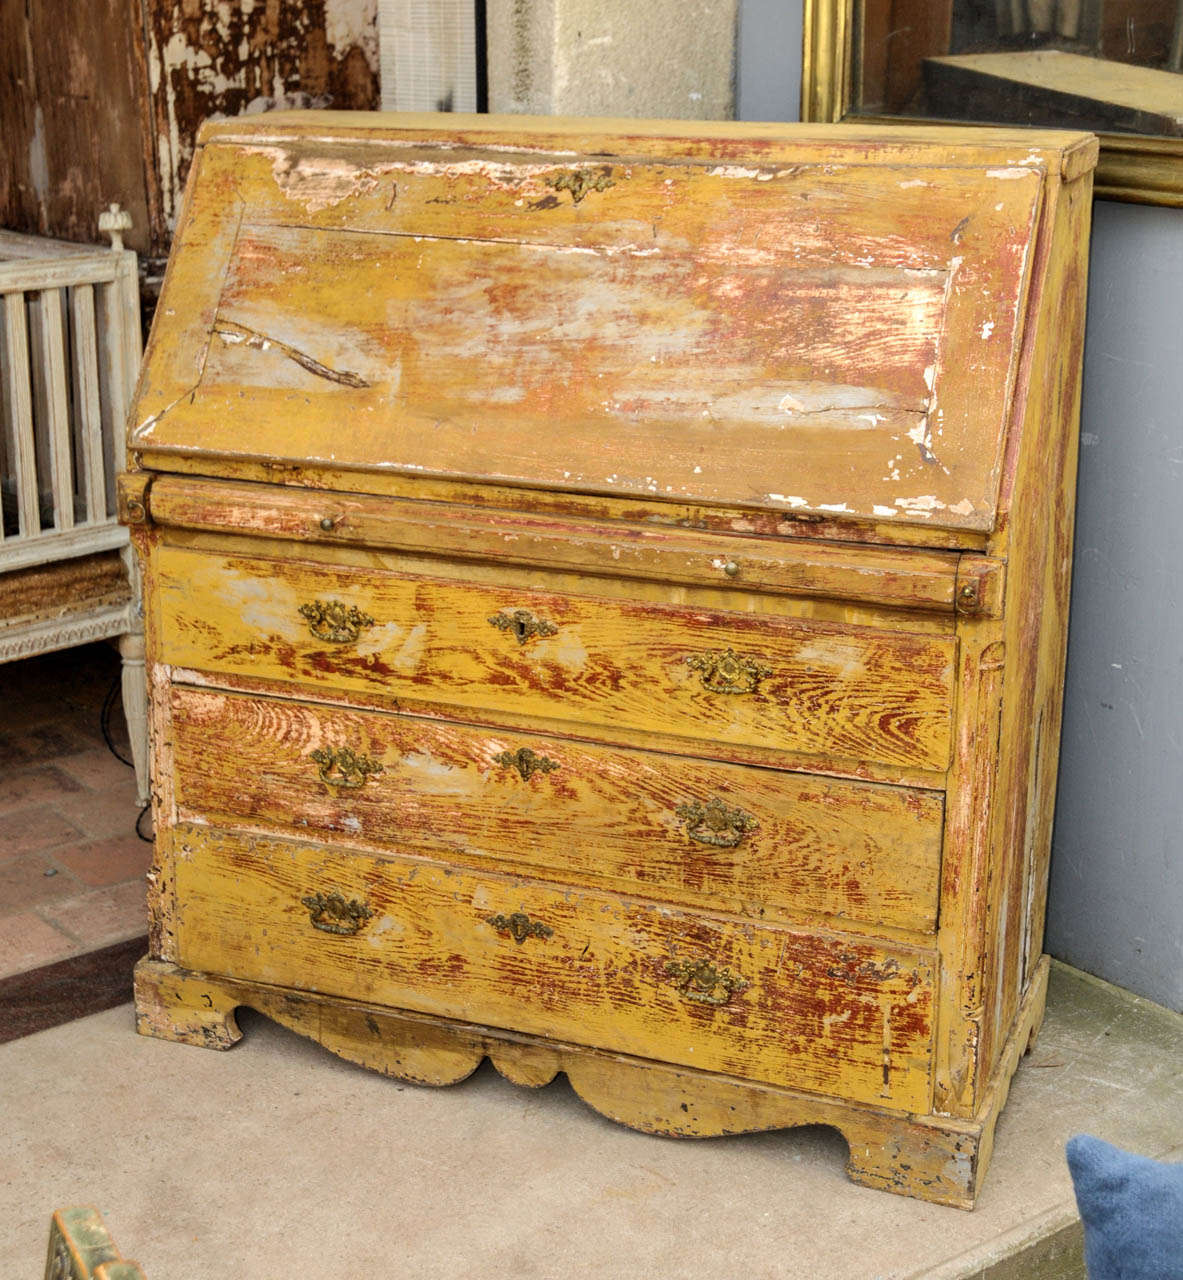 19th Century secretaire. Brown and yellow patina larch wood. Ten drawers inside and four front drawers. Varnish pine tree inside. Good condition. Normal wear consistent with age and use.